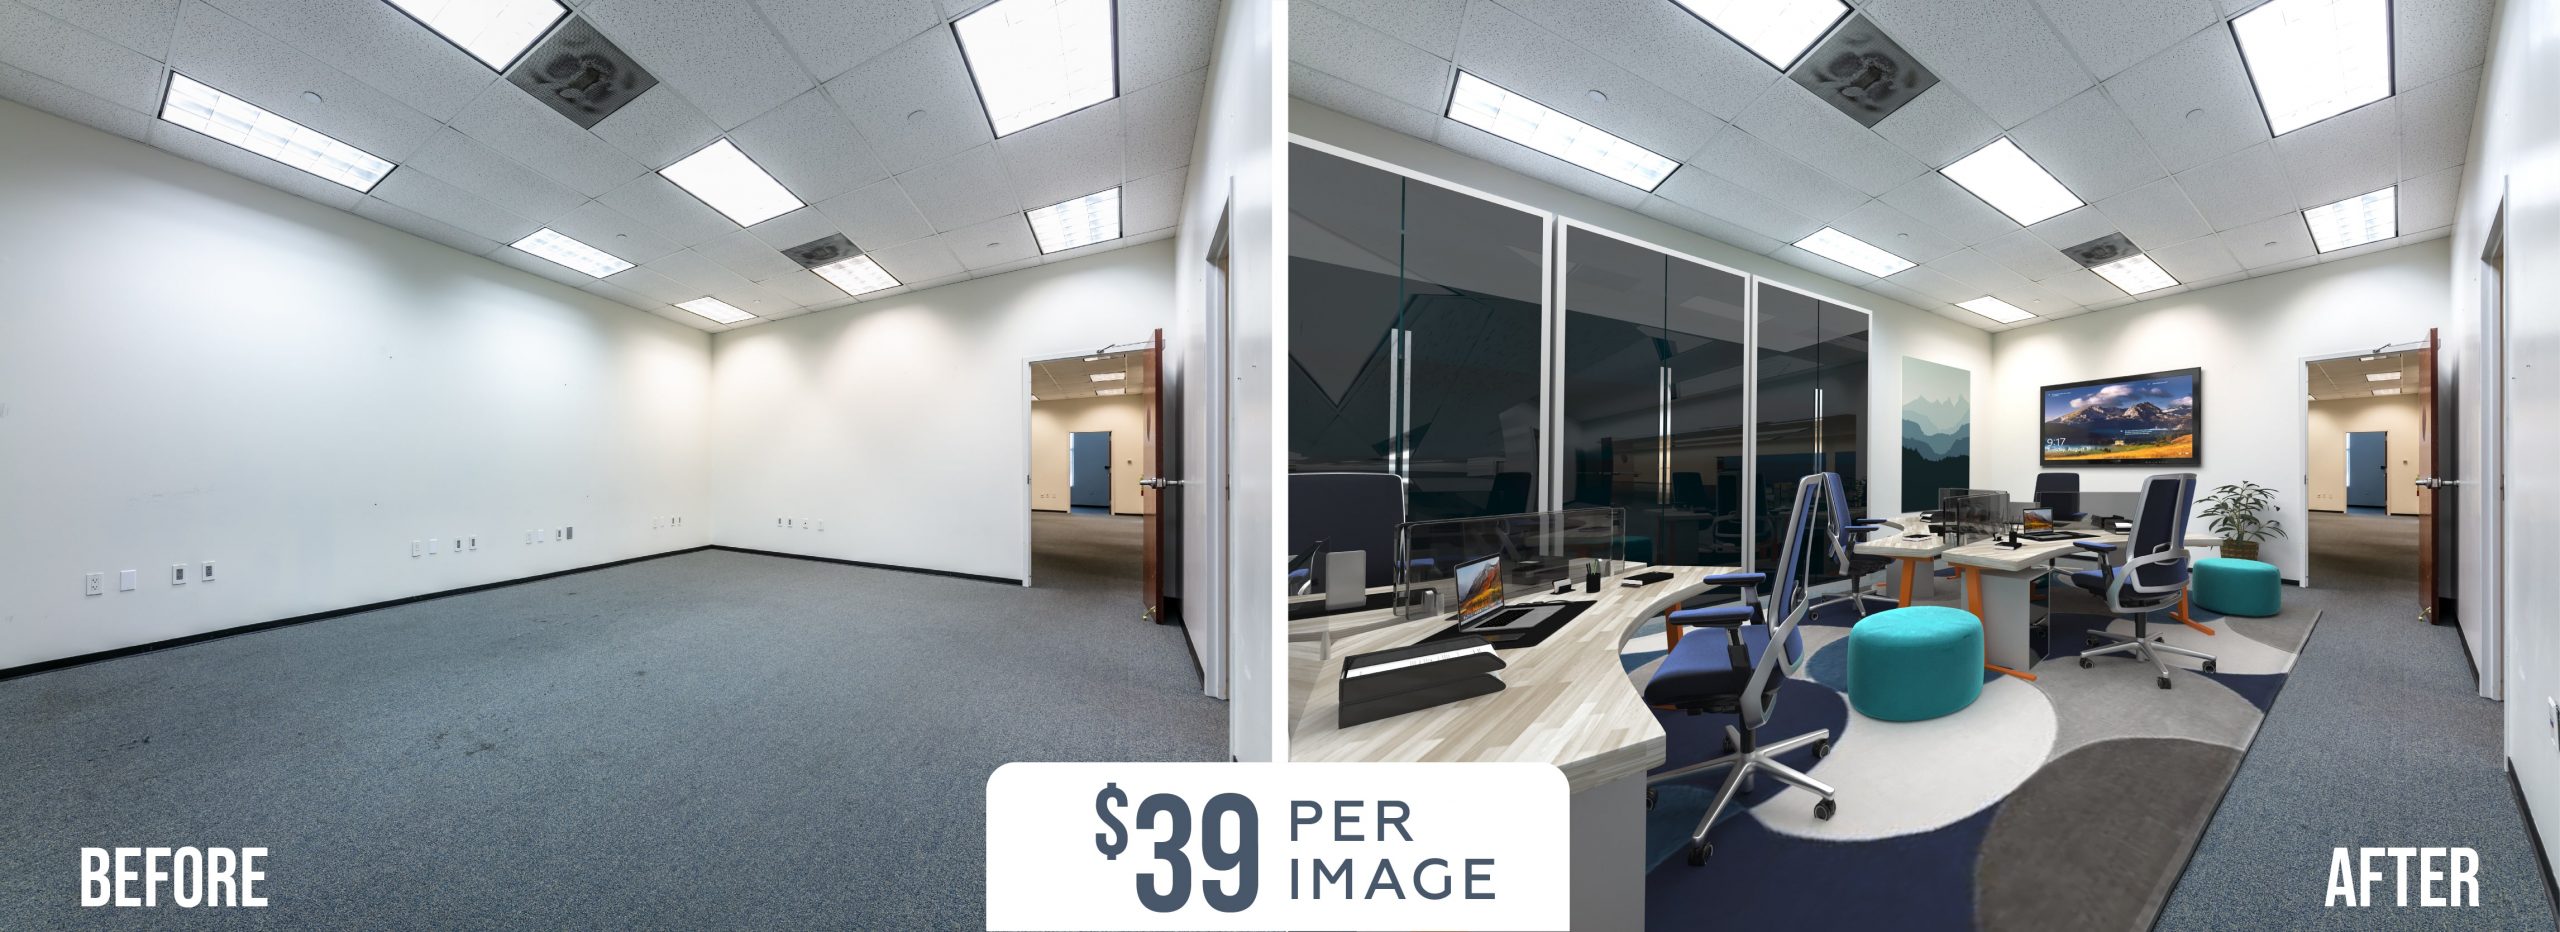 Commercial Virtual Staging - Before & After